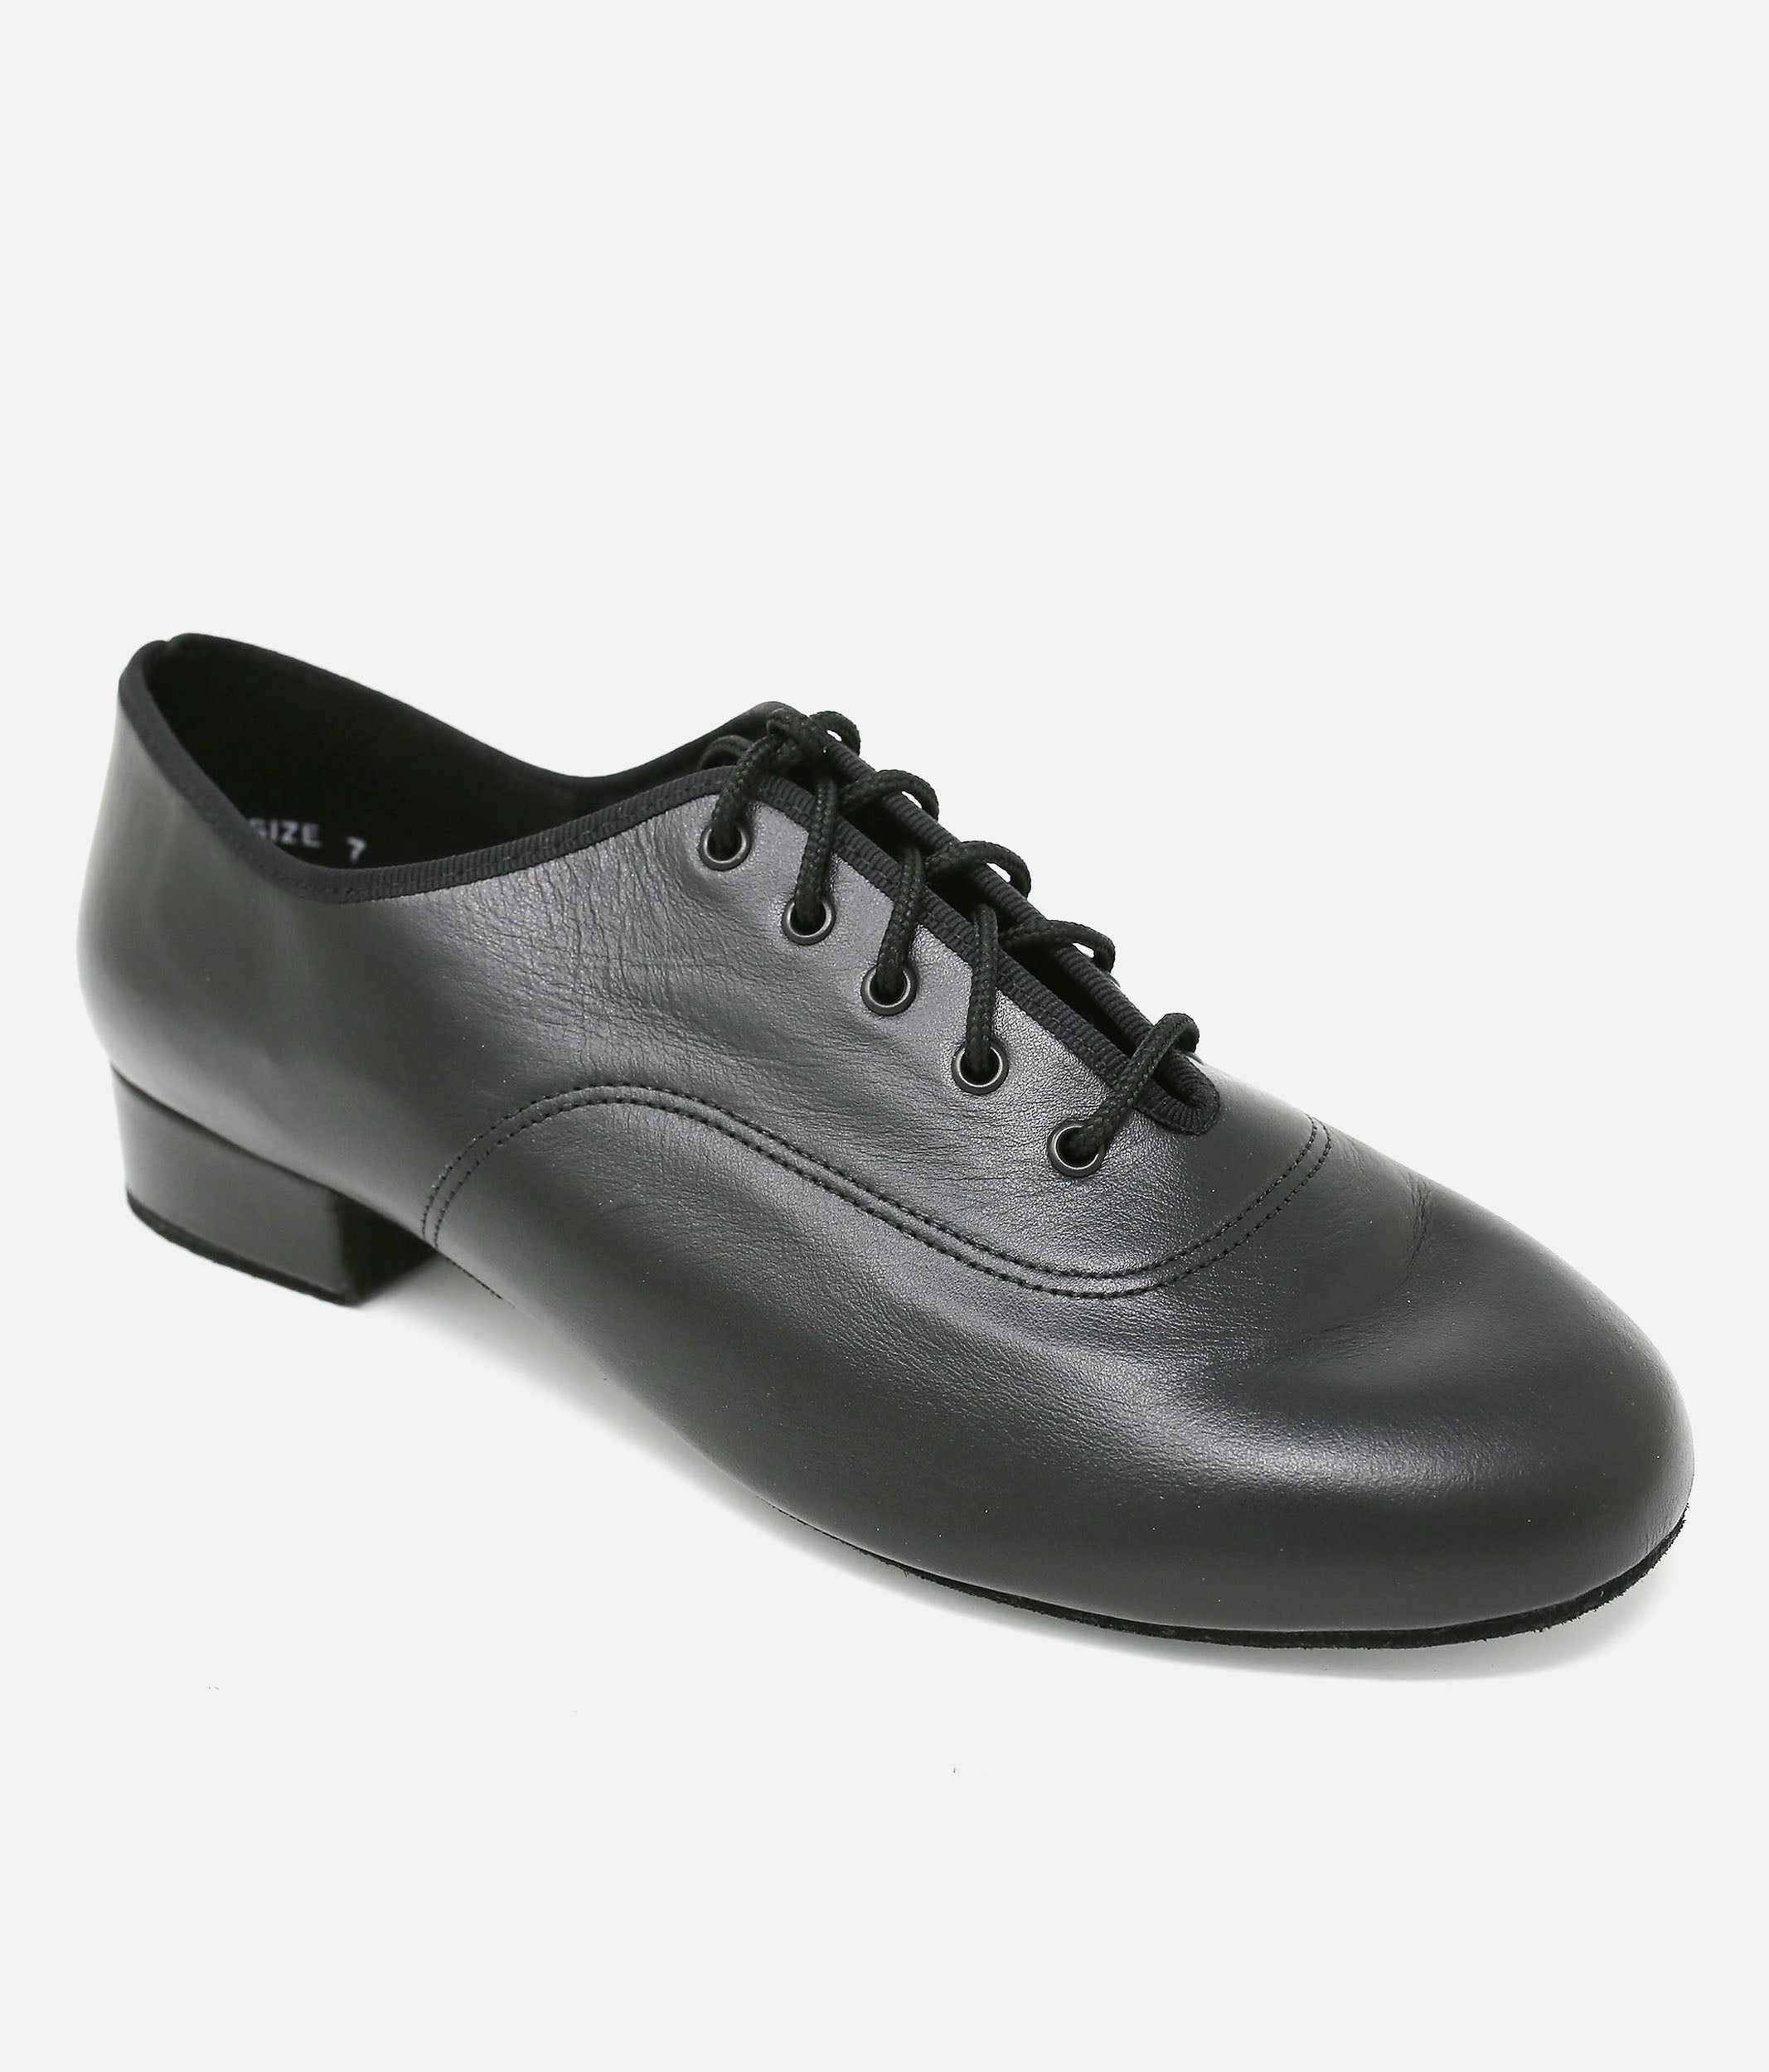 Men’s Leather Ballroom Dance Shoes, Oxford Style